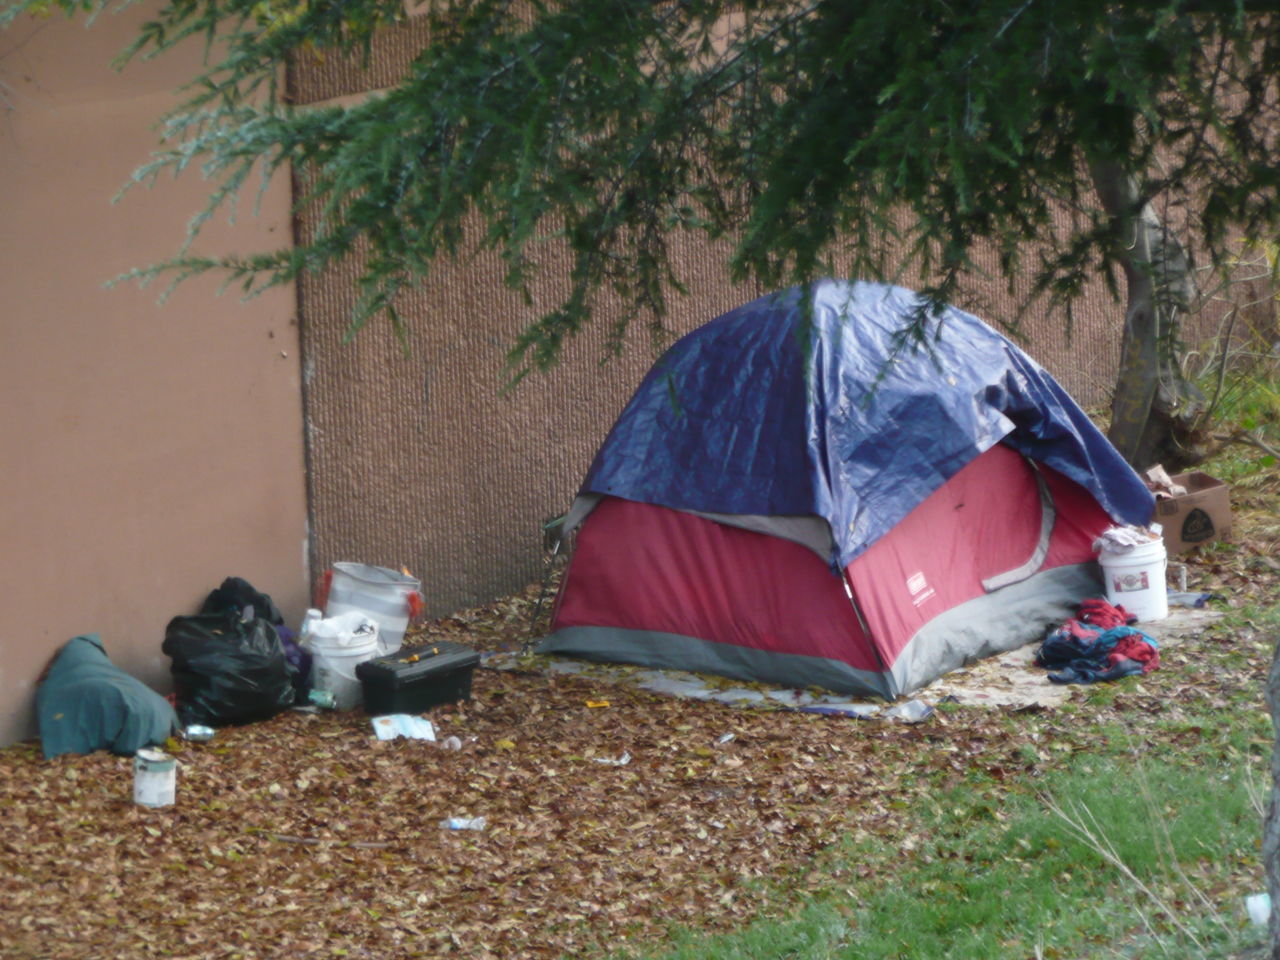 VIEW OF TENT IN THE GROUND